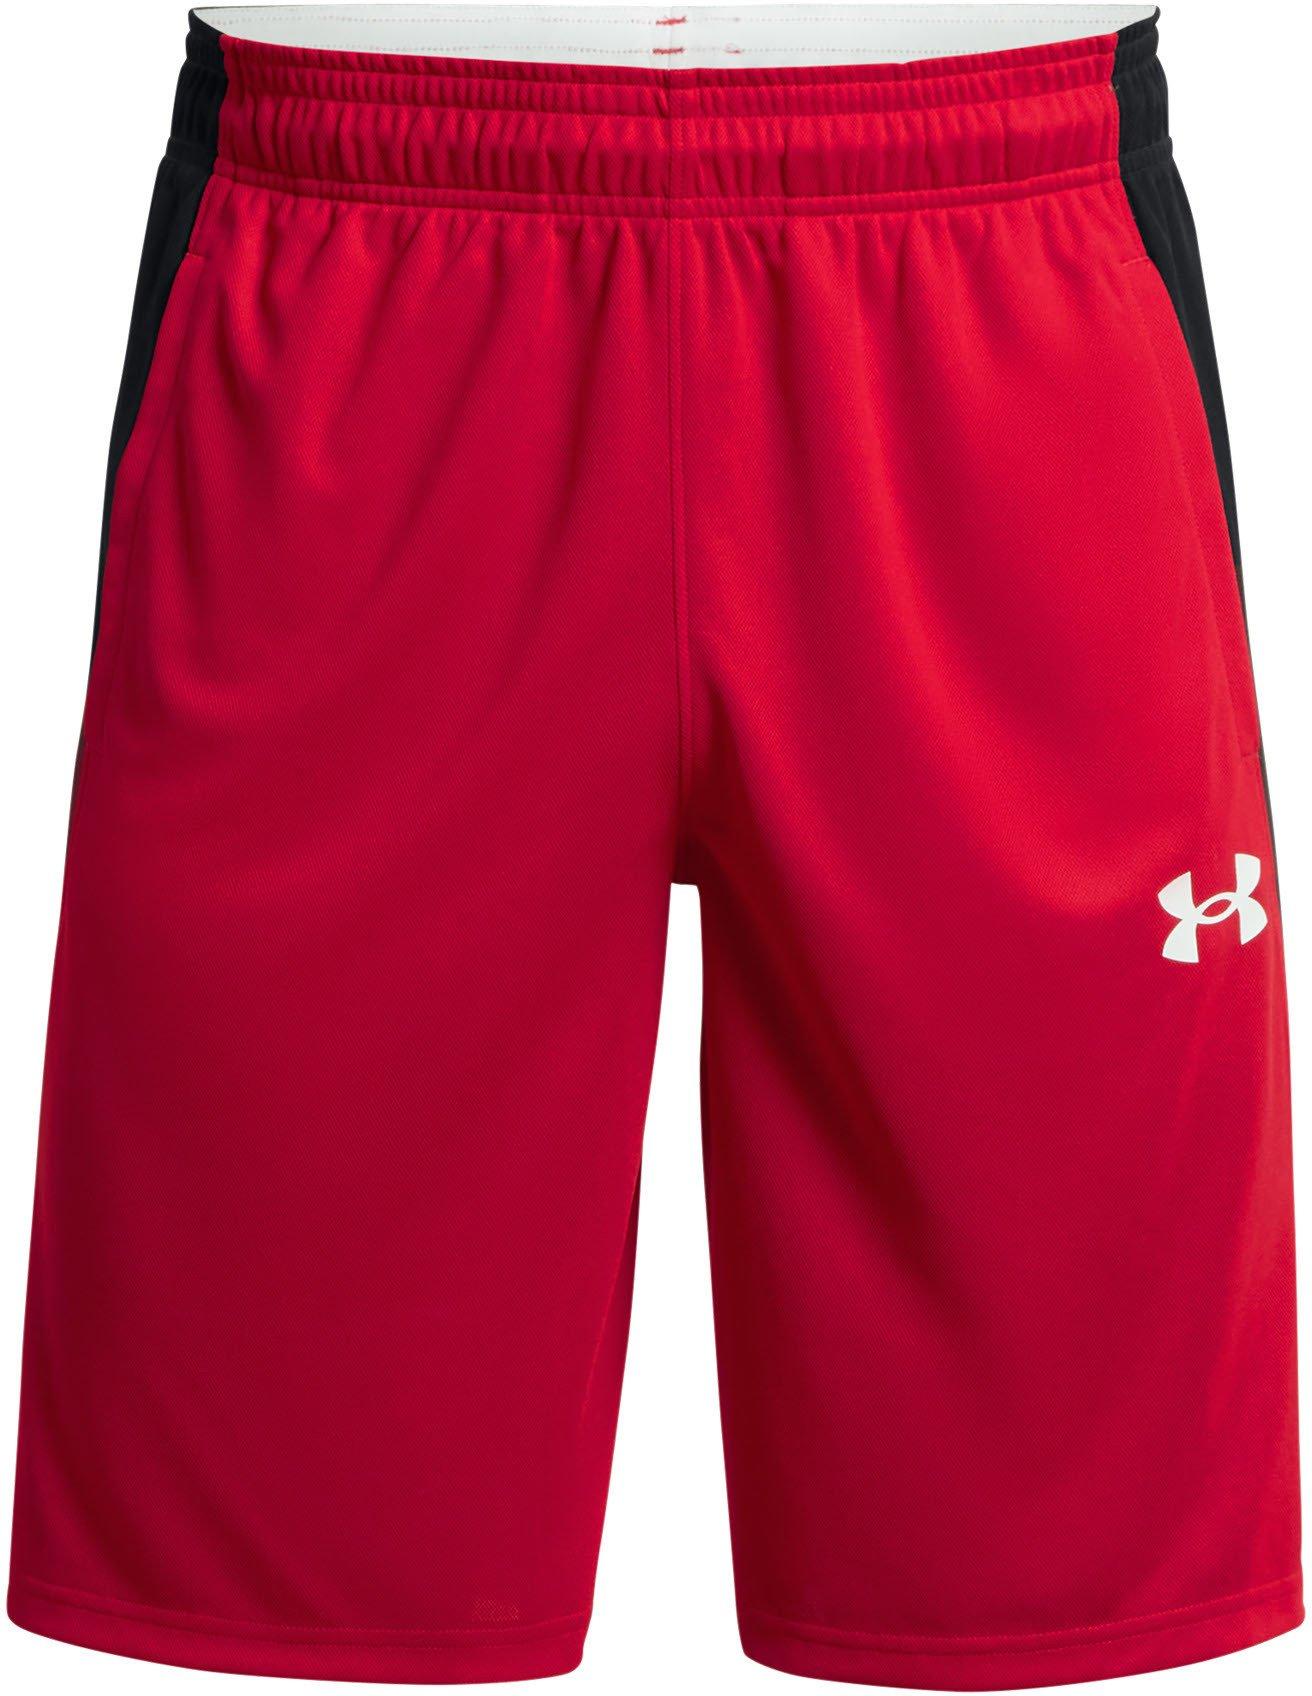 Under Armour BASELINE 10'' SHORT-RED S